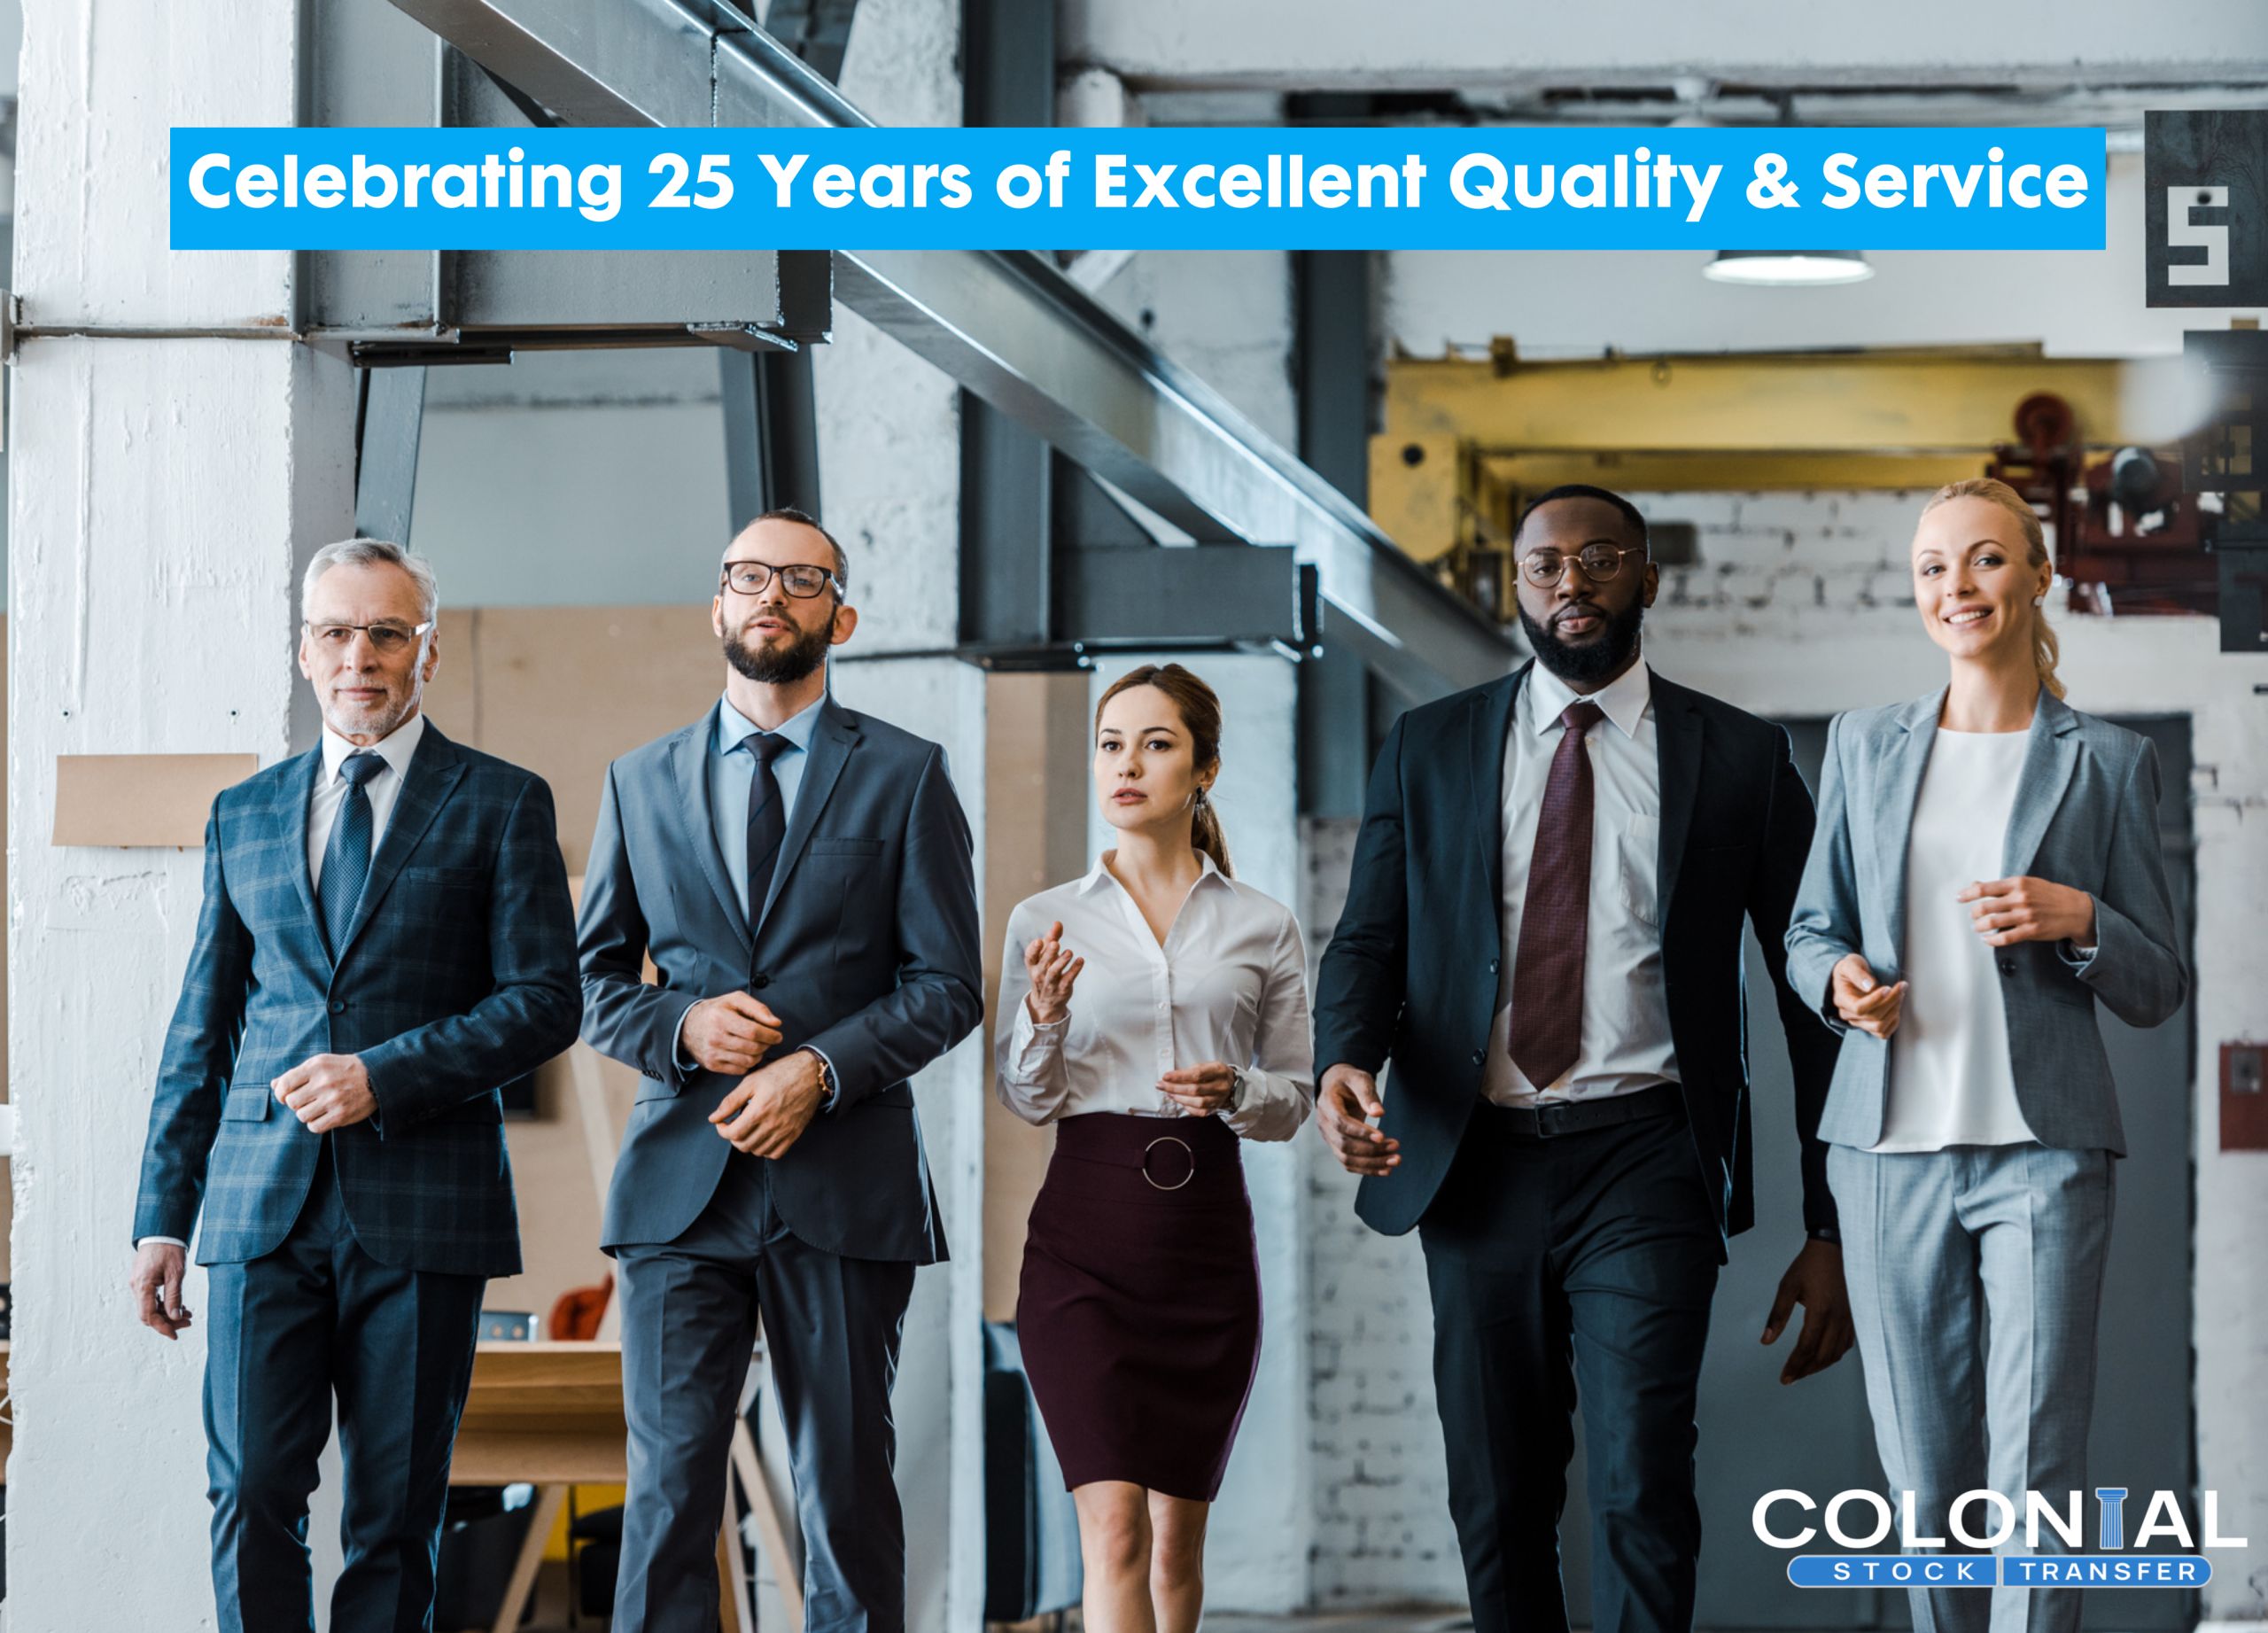 Celebrating 25 Years of Excellent Quality & Service